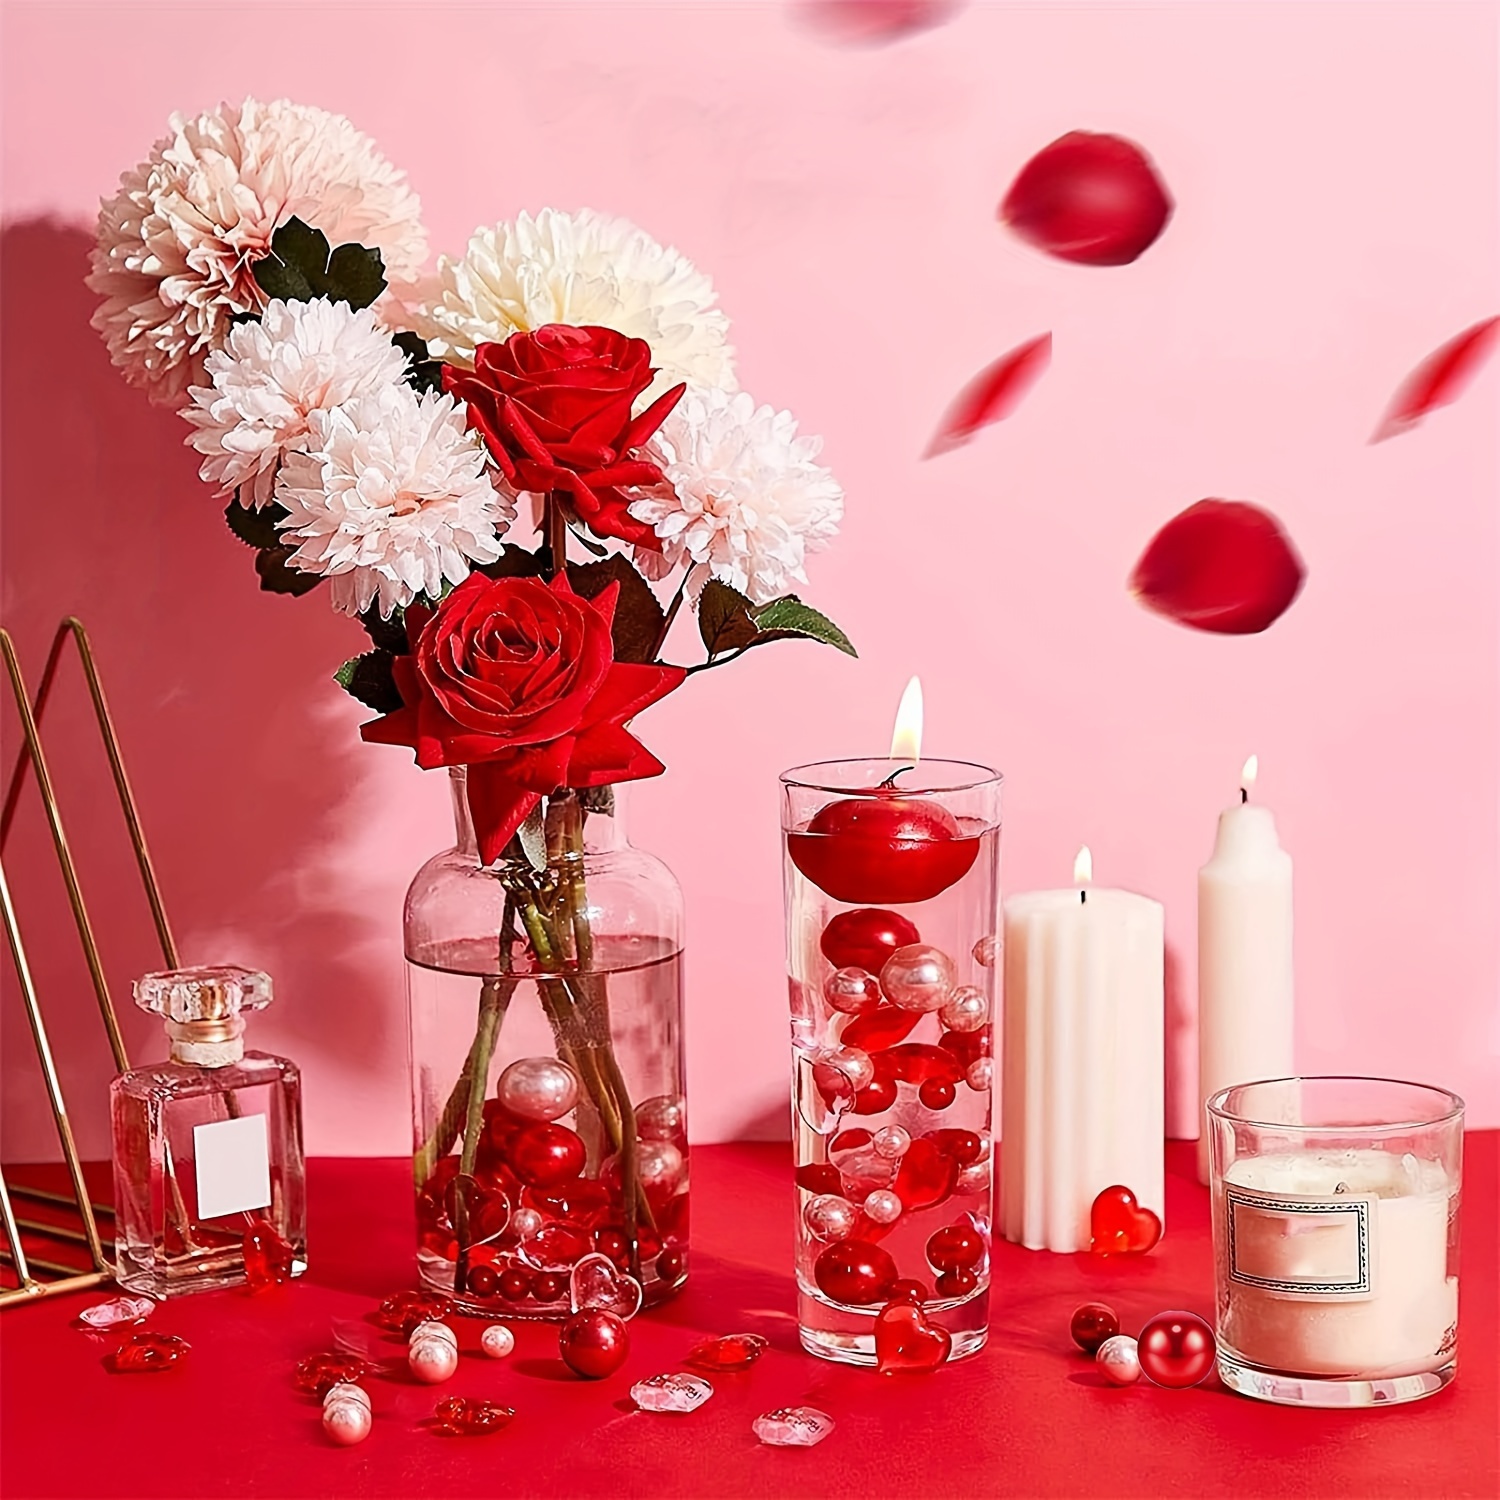  Juinte 2120 Pieces Valentine's Day Vase Filler Wedding  Decoration Heart Pearl Red Pink Heart Pearls Water Gels Beads Floating  Candles Centerpiece for Valentine Wedding Home Dinning Table Party Decor :  Home